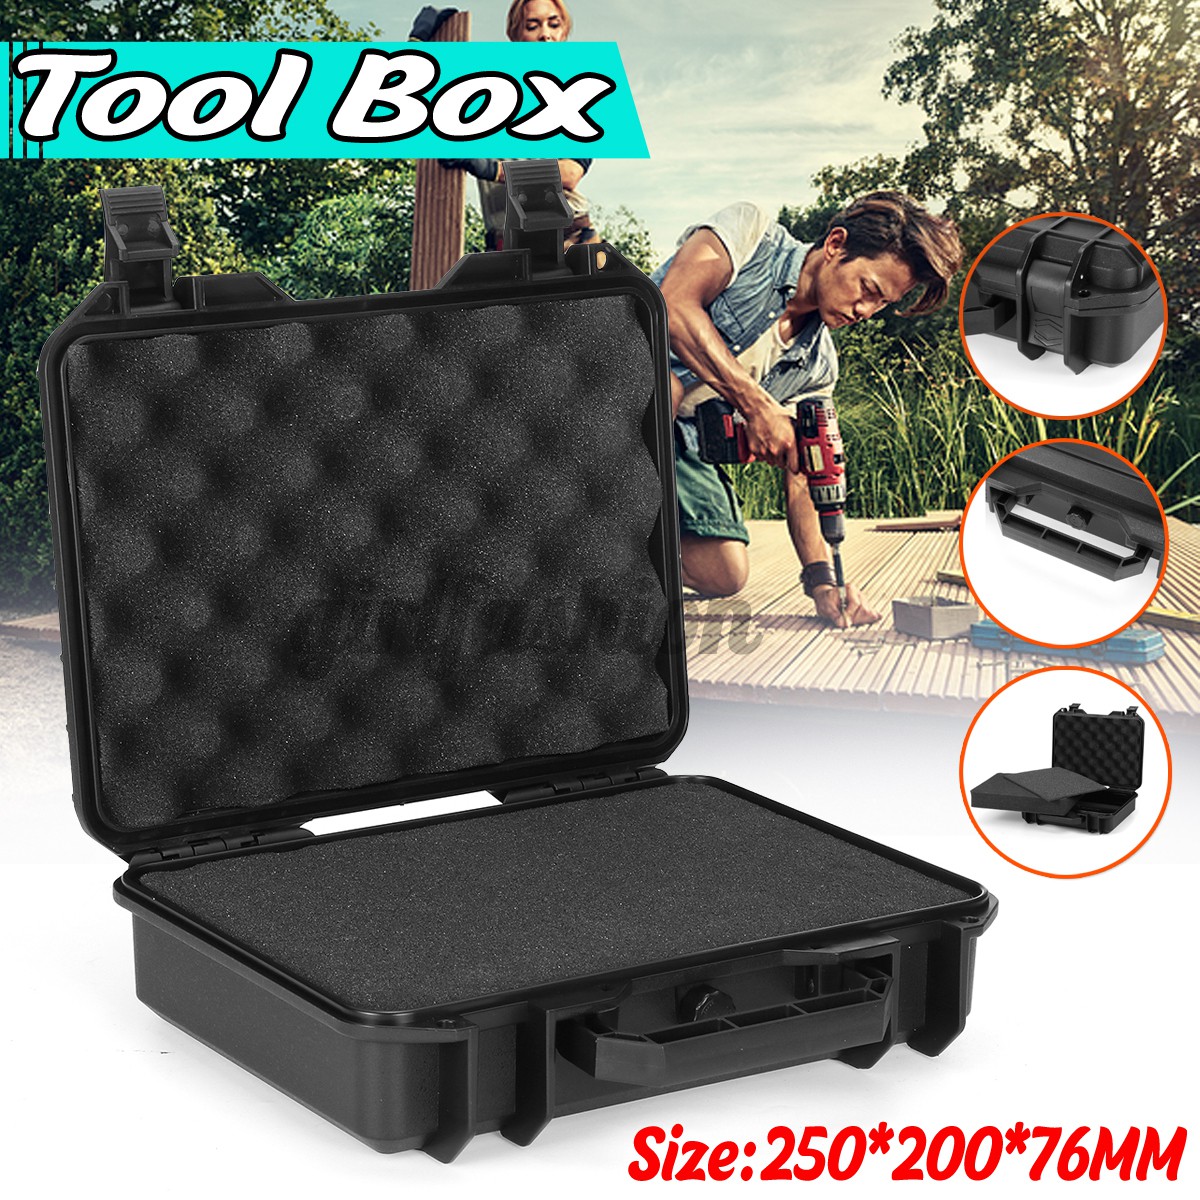 Waterproof Portable Hard Carry Protective Tool Case Shockproof Storage Box